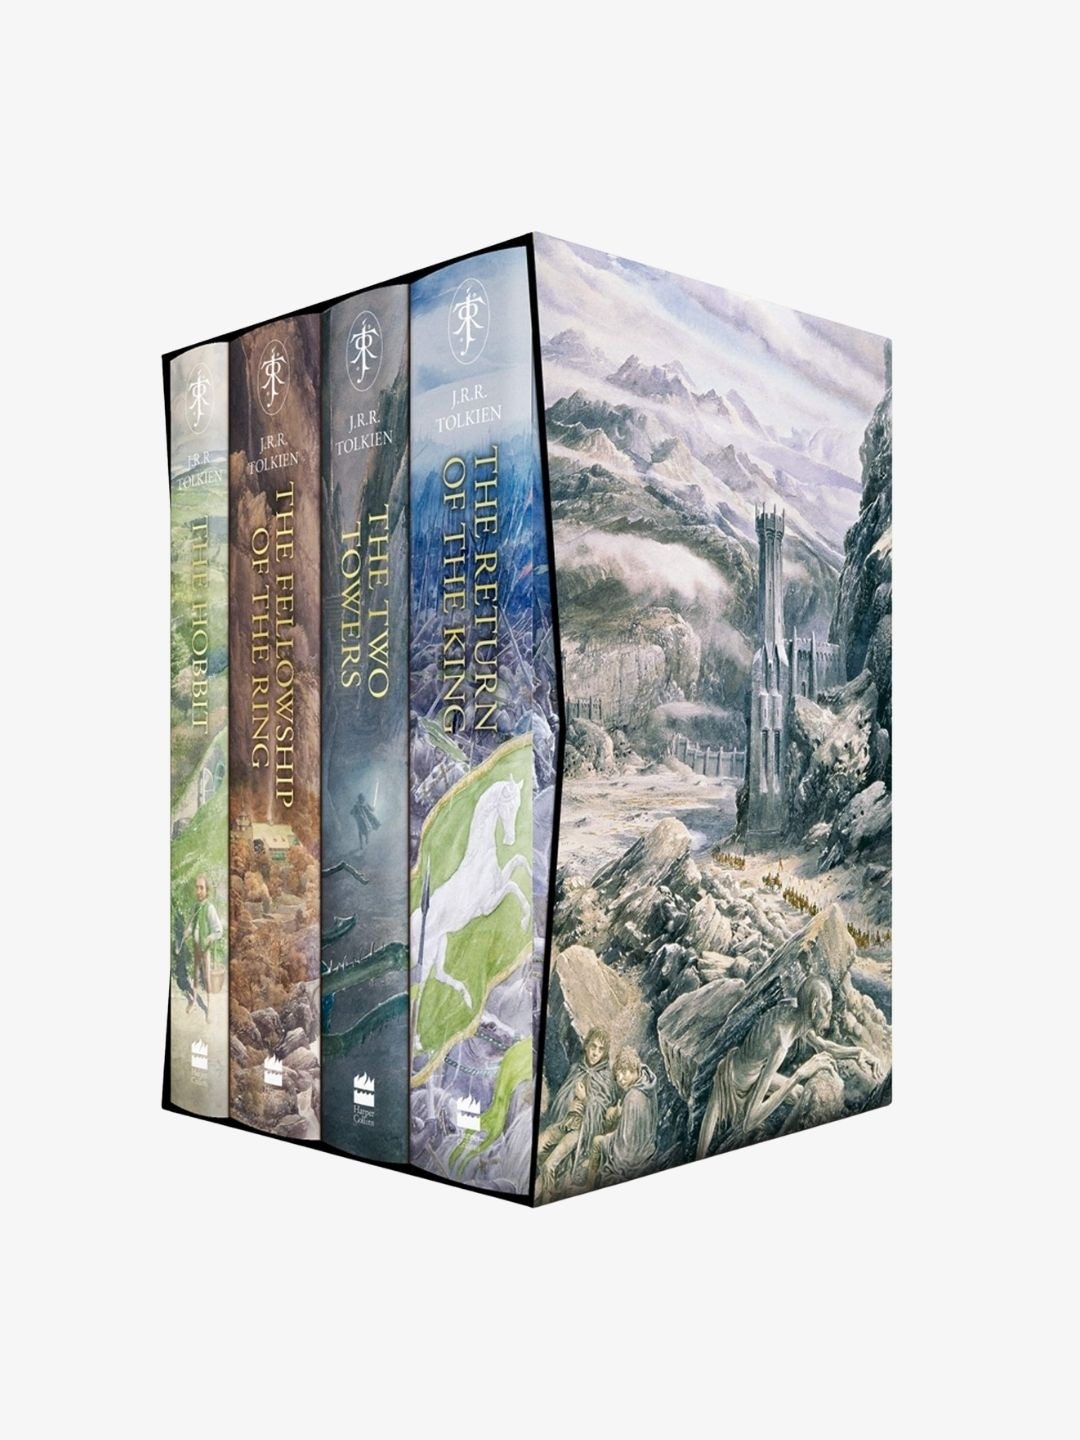 THE HOBBIT  THE LORD OF THE RINGS BOXED SET [ILLUSTRATED EDITION]